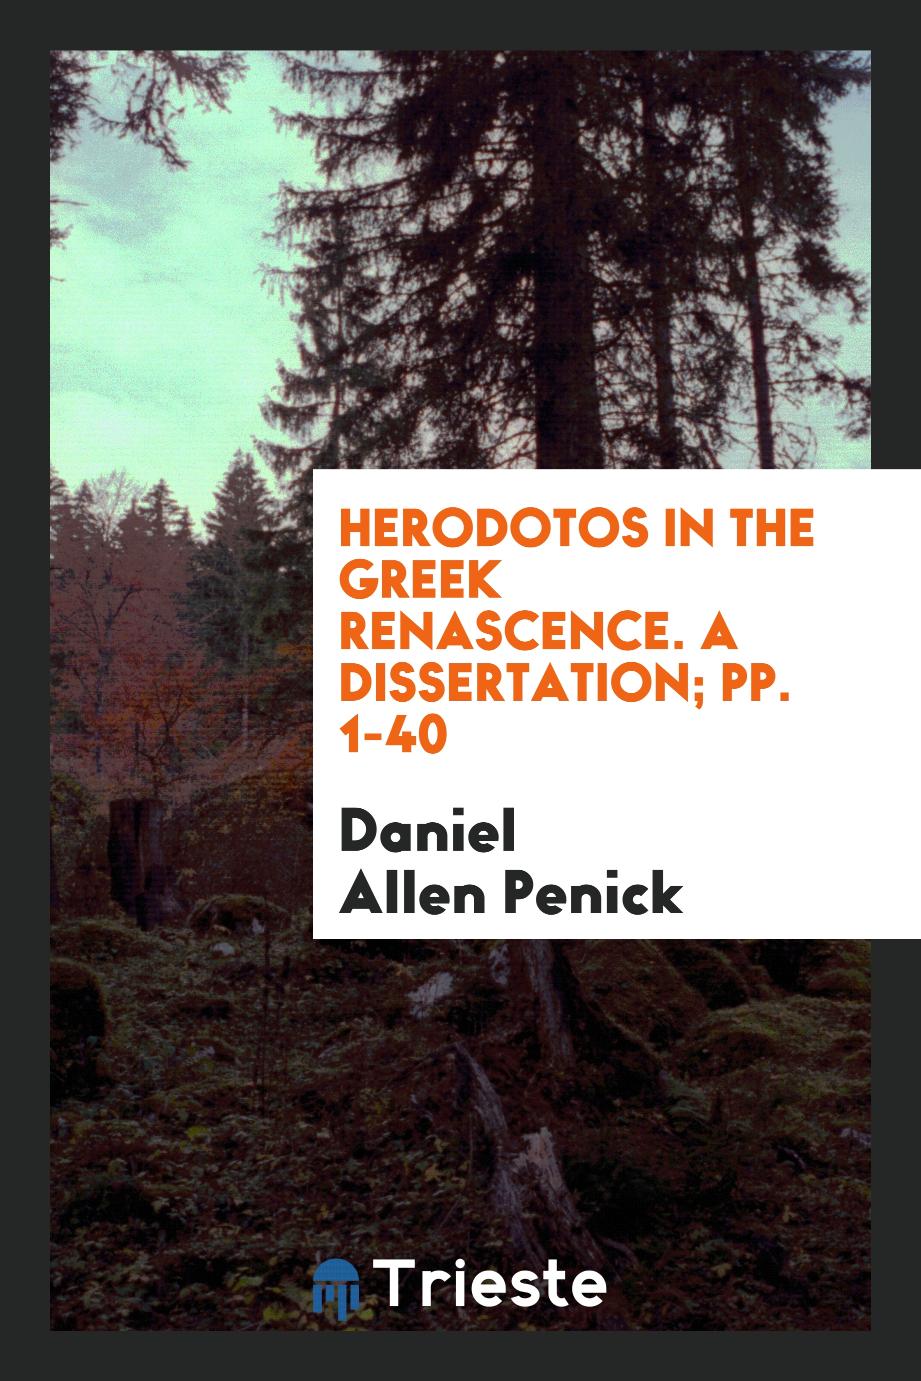 Herodotos in the Greek Renascence. A dissertation; pp. 1-40